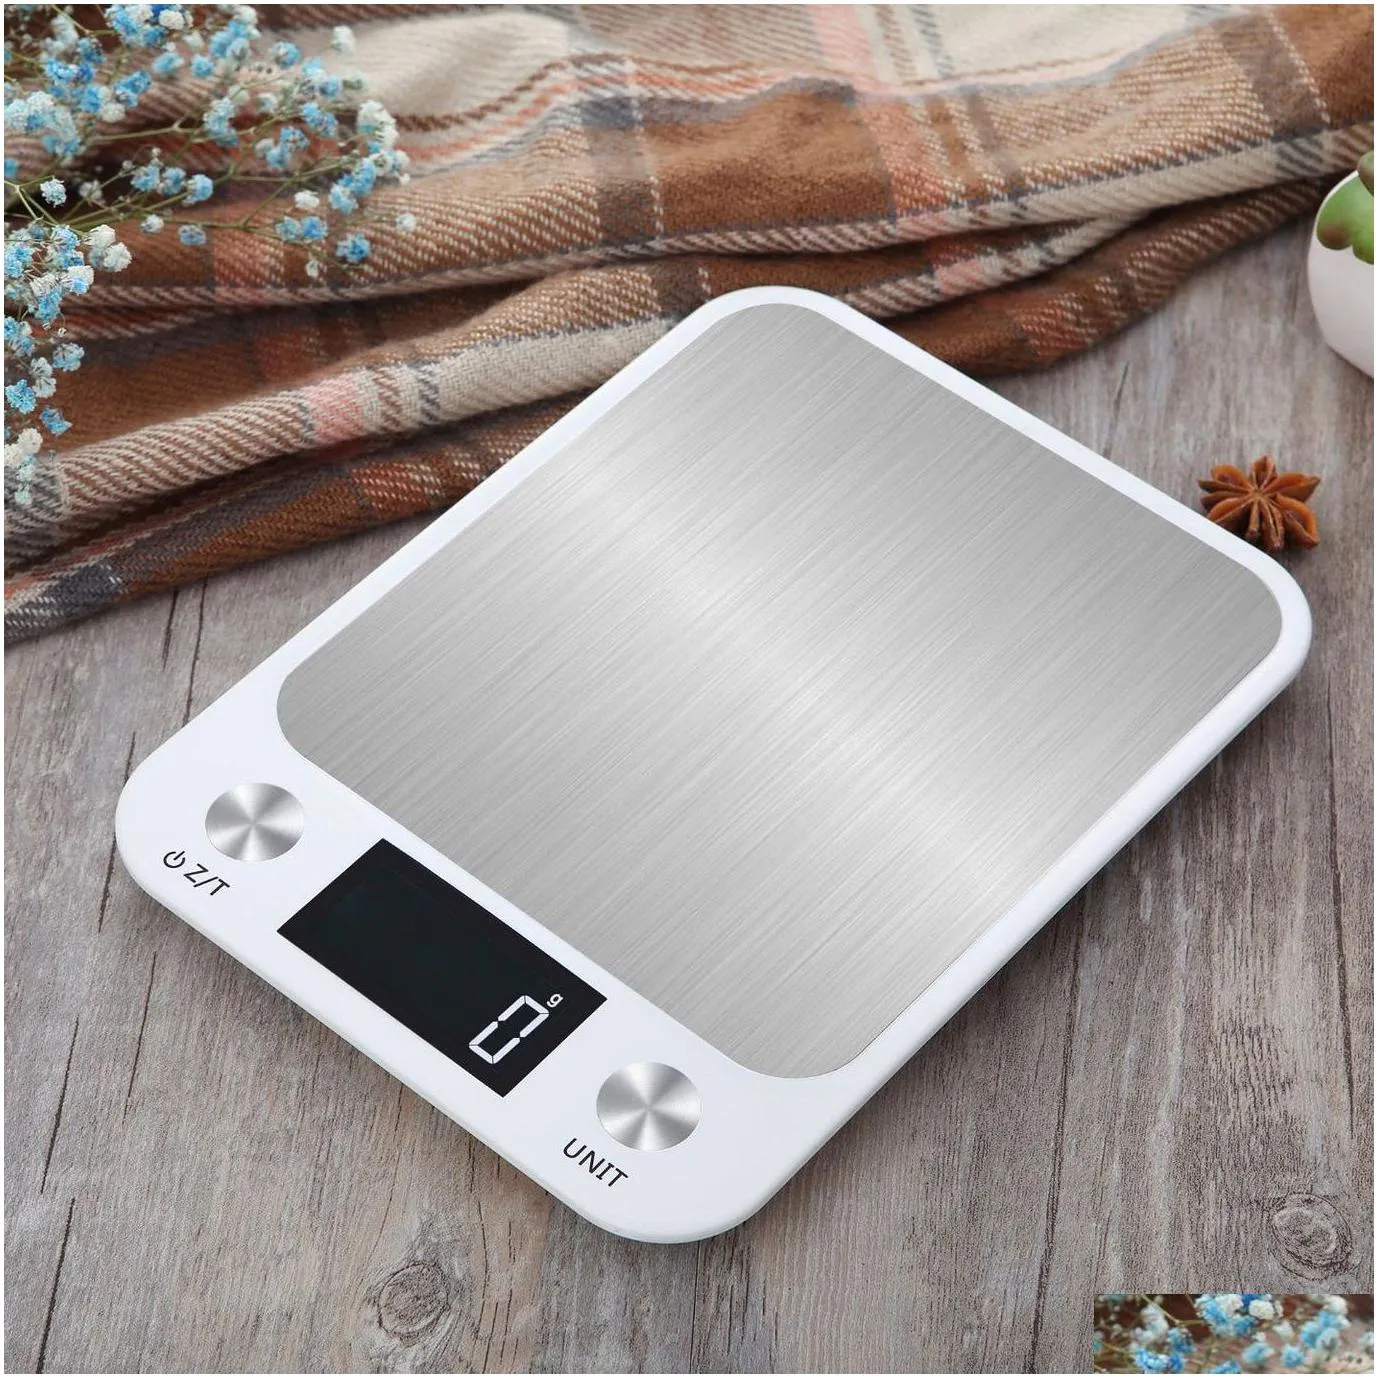 Measuring Tools Kitchen Scale Weighing Food Coffee Nce Smart Electronic Digital Scales Stainless Steel Design For Cooking And Baking D Otakm